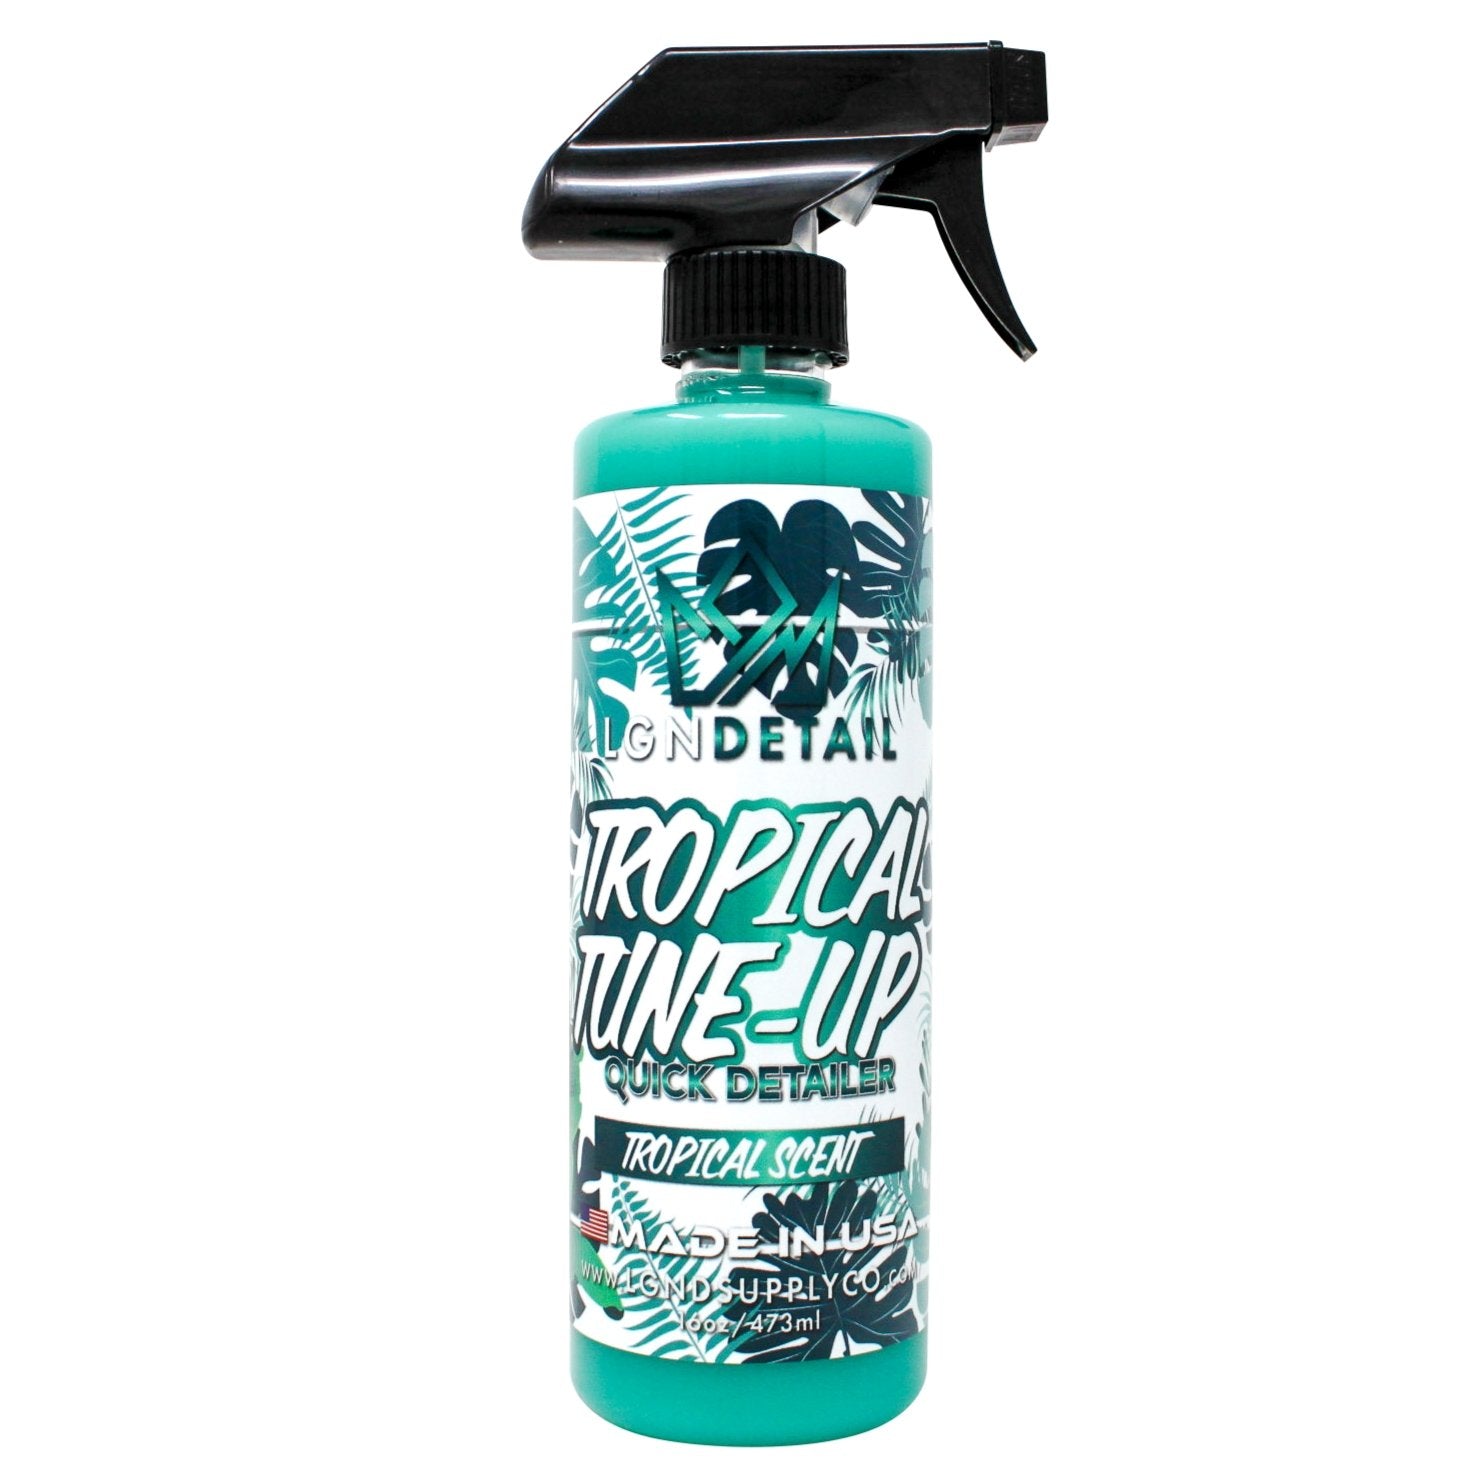 Limited Edition Tropical Tune-Up Quick Detailer - LGND SUPPLY CO.